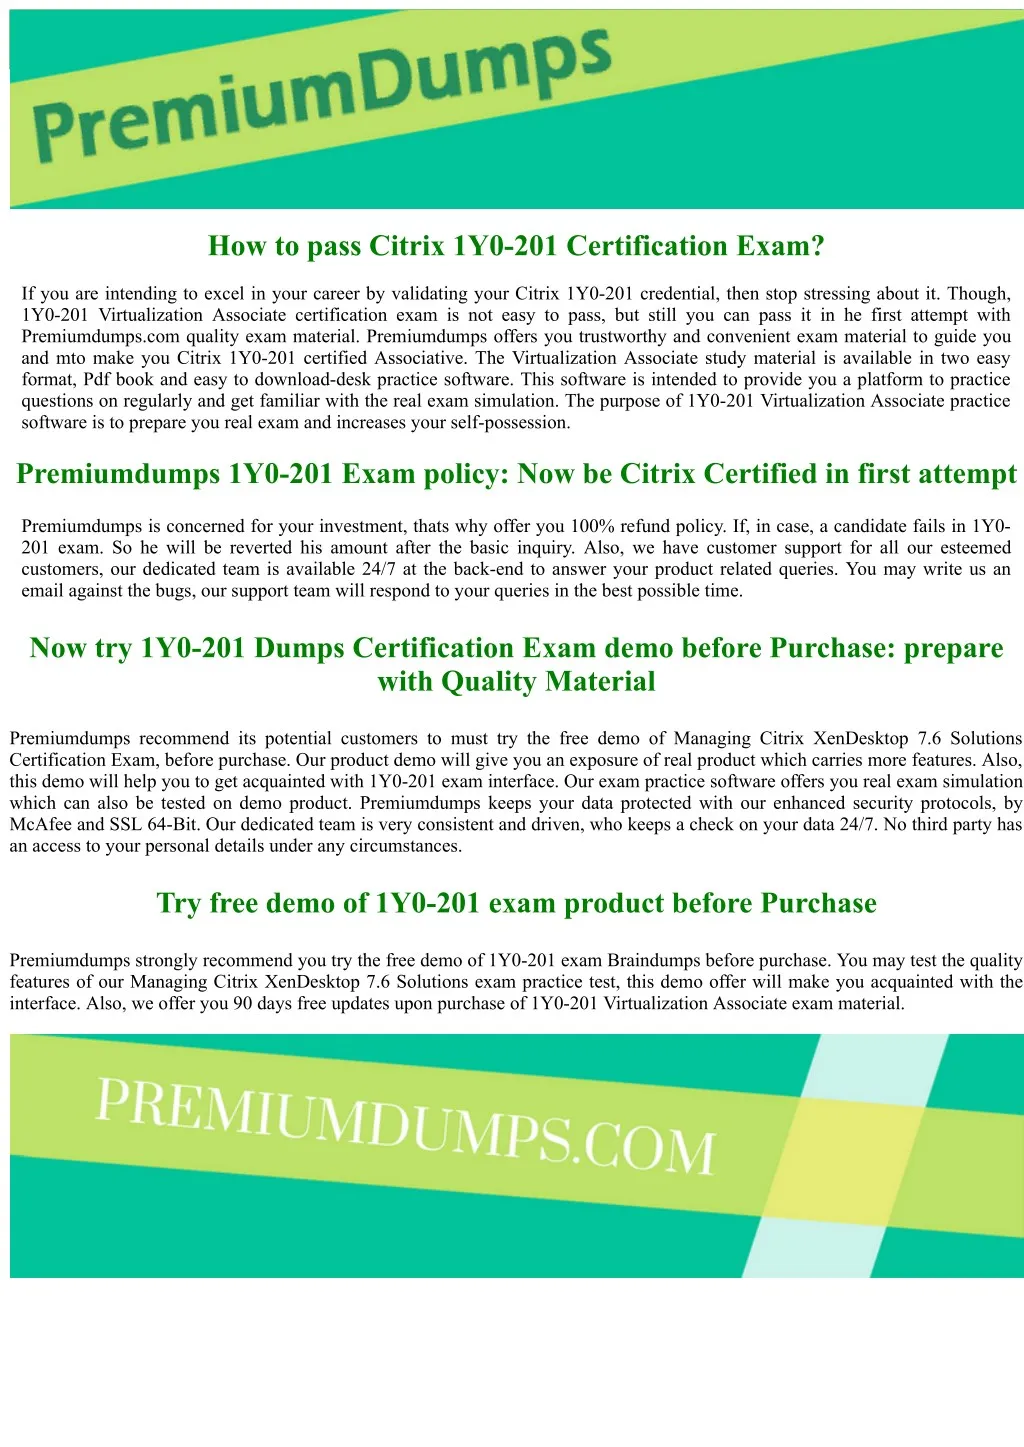 how to pass citrix 1y0 201 certification exam